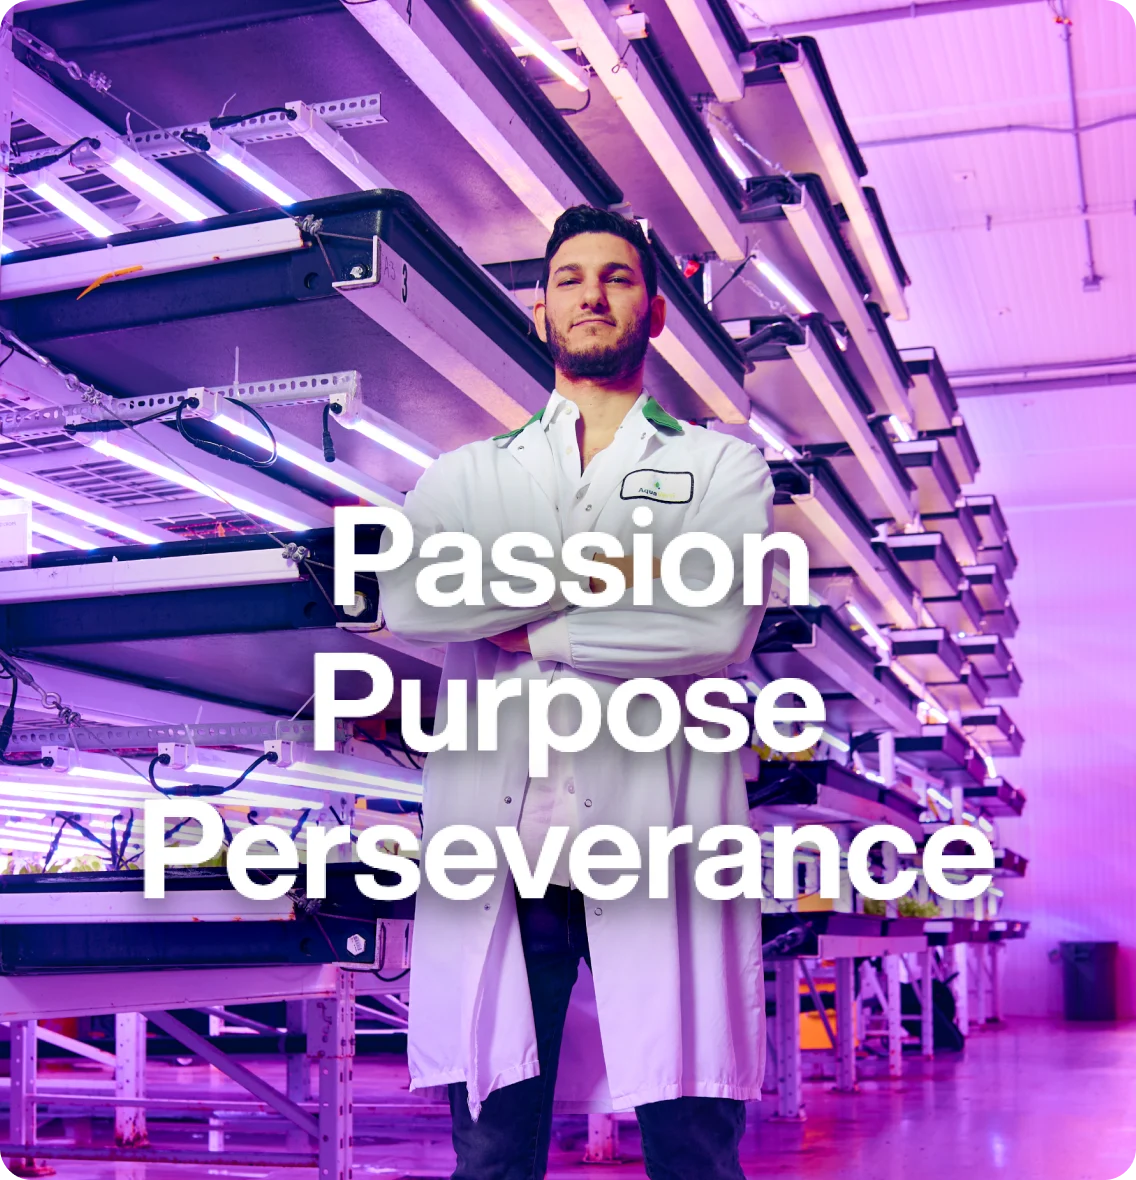 Georges Aczam ‌standing in indoor hydroponic farm overlaid with words, “passion, purpose, perseverance”